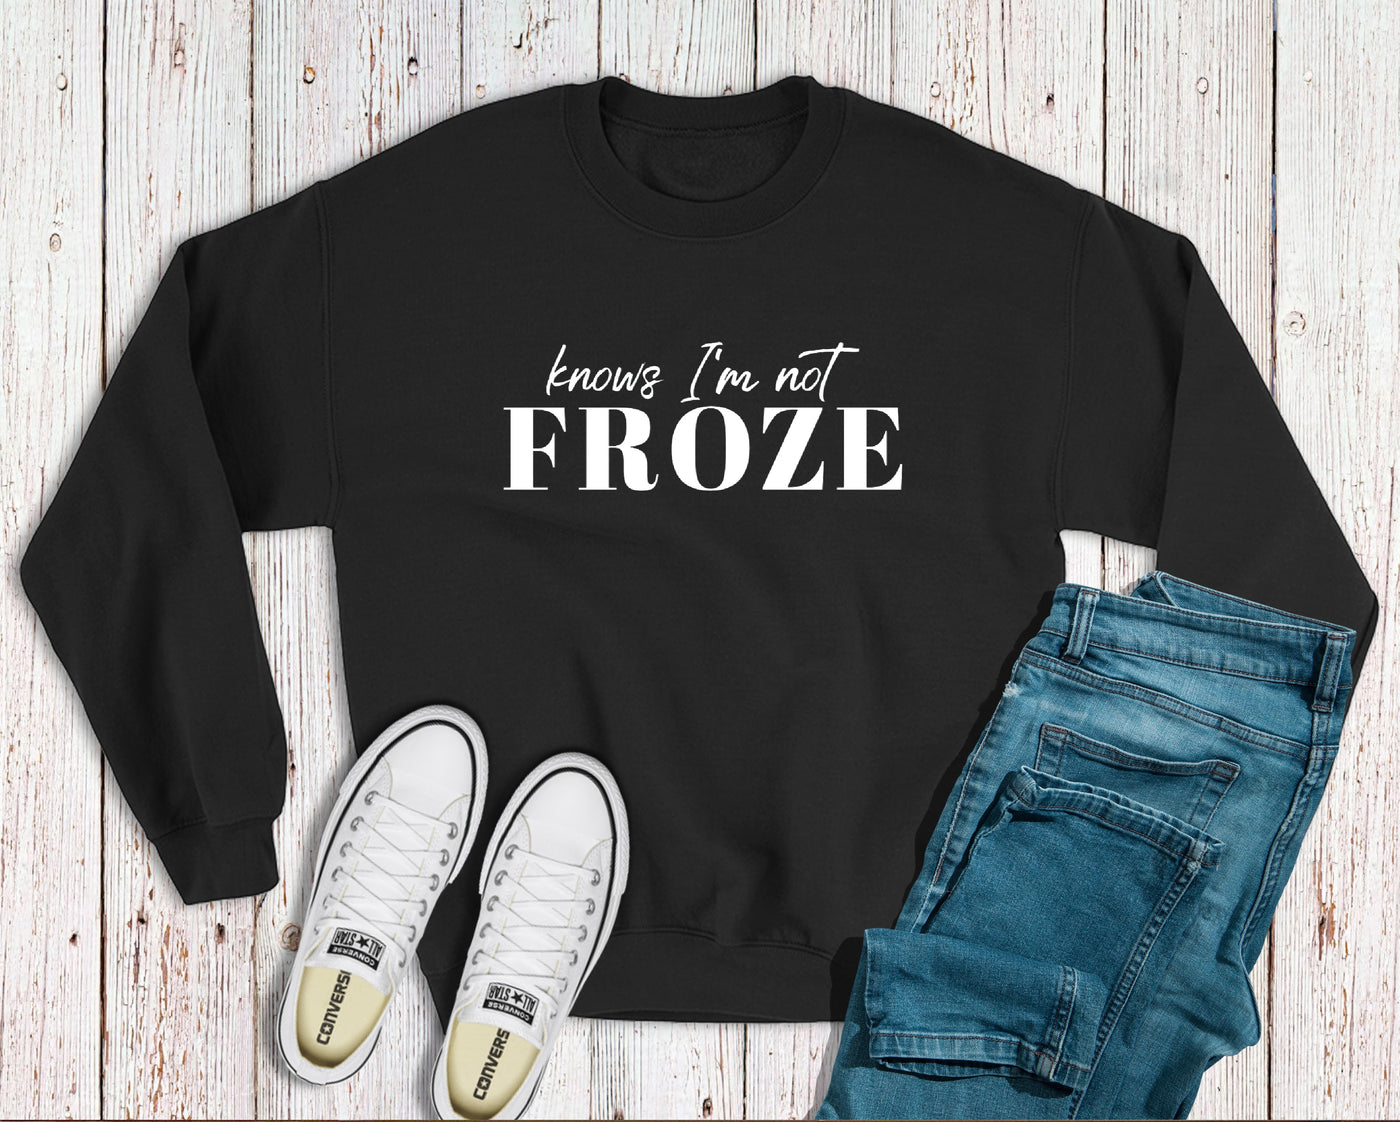 "Knows I’m Not Froze" Toddler/Youth Crewneck Sweatshirt